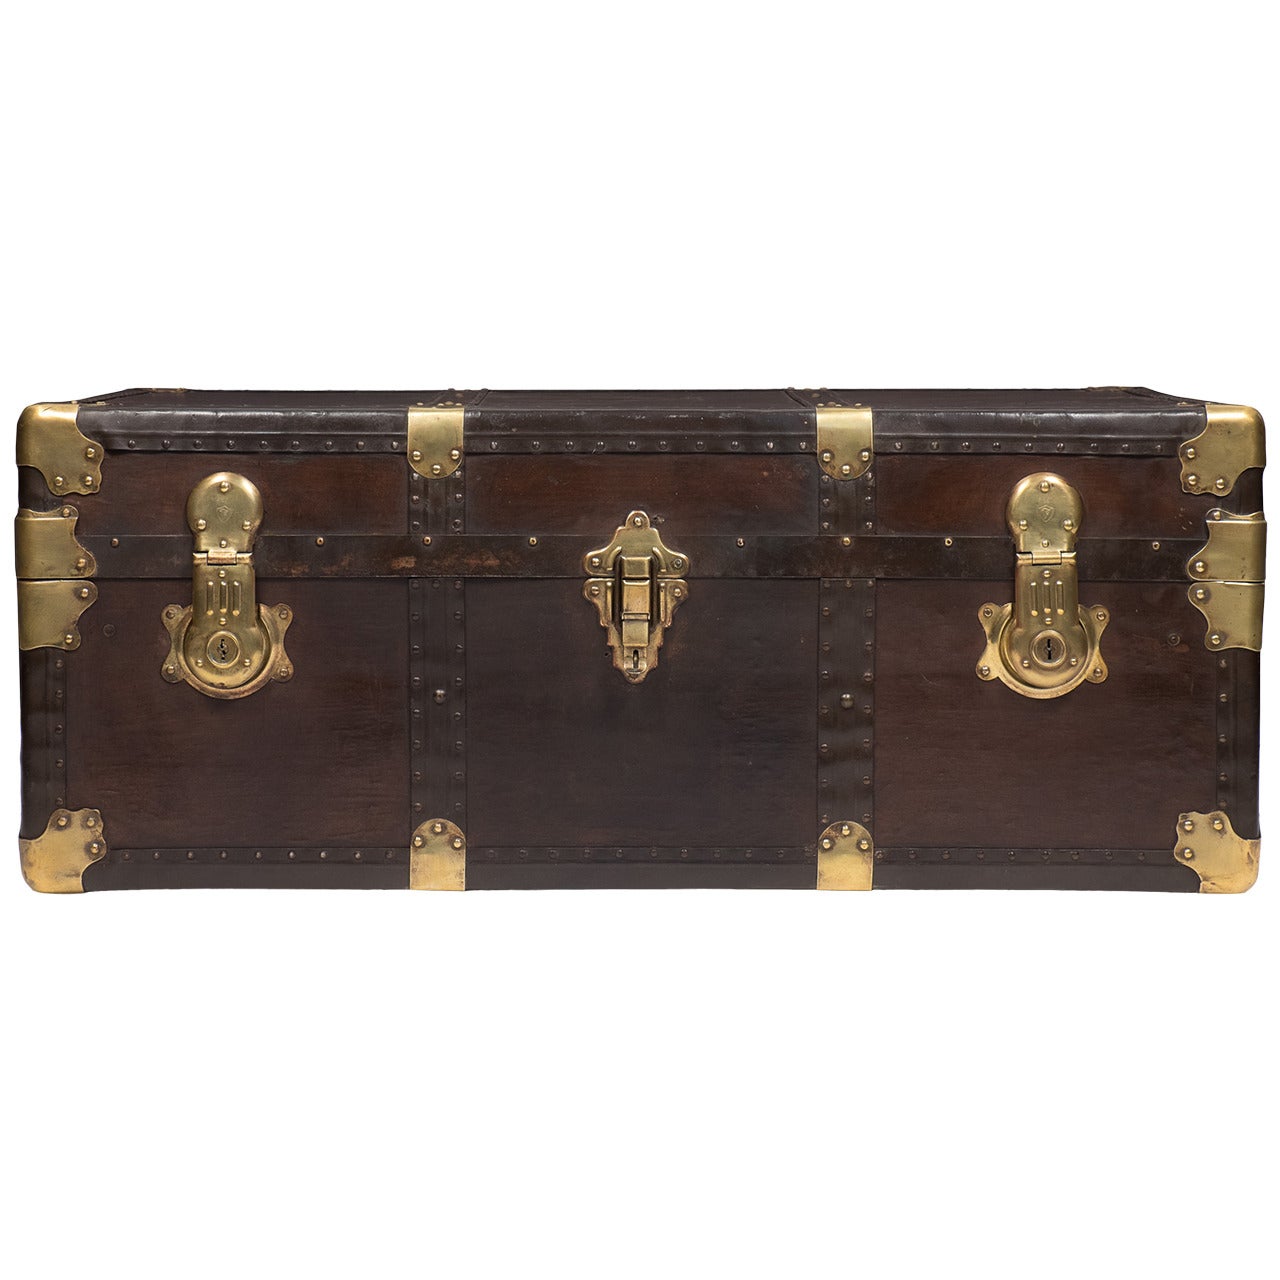 French Vintage Travel Trunk